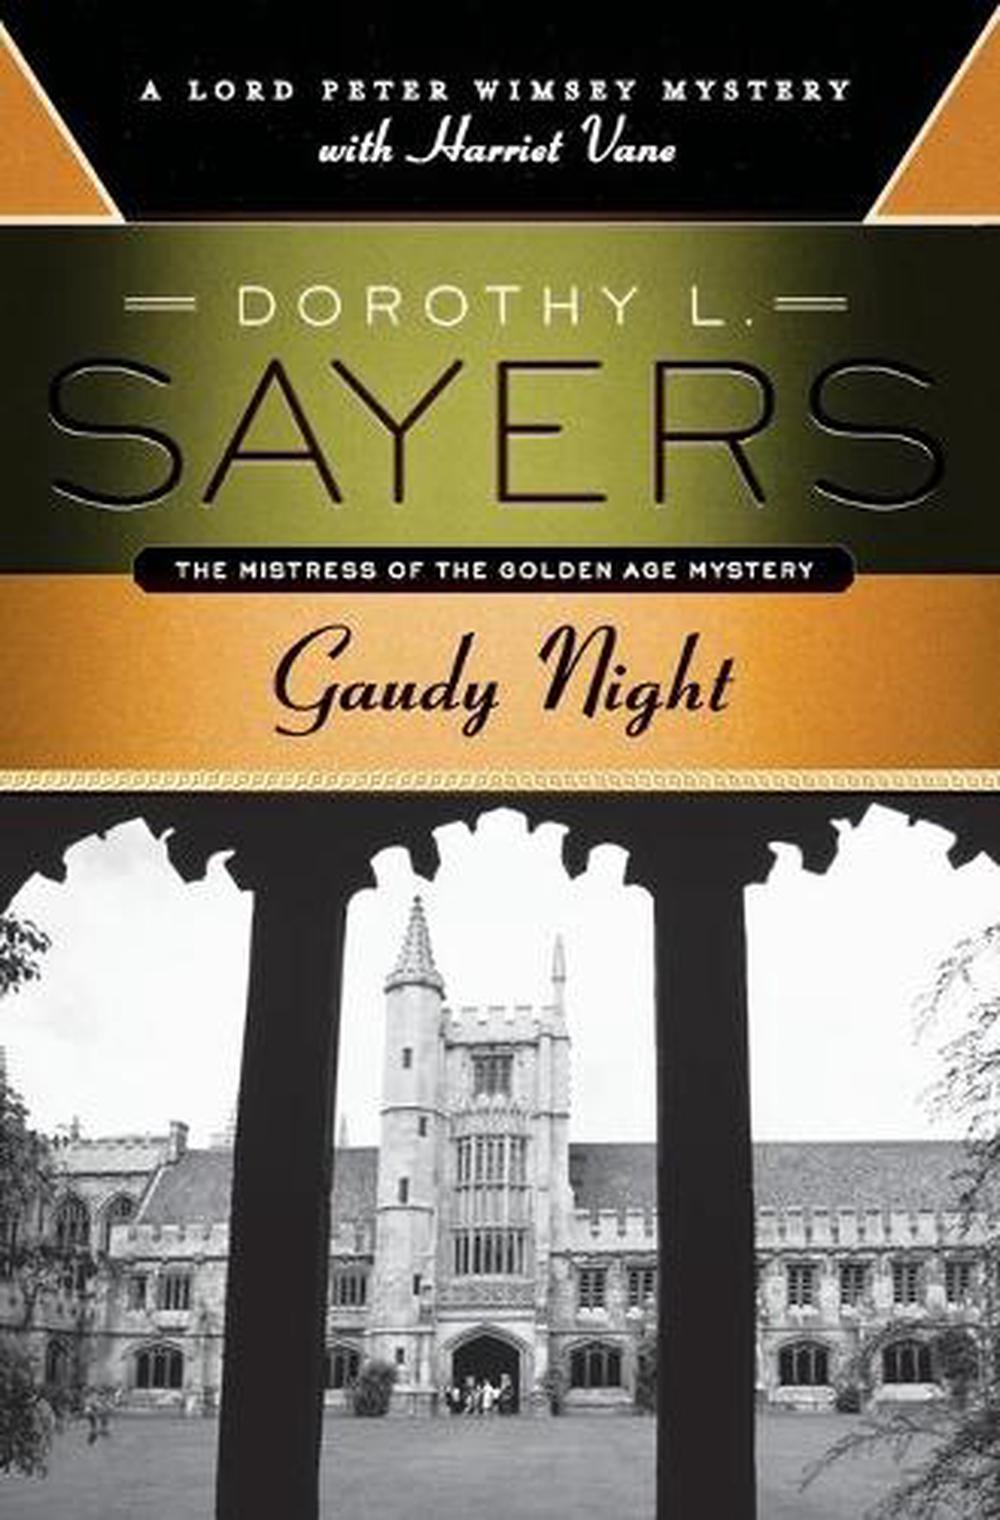 Gaudy Night: A Lord Peter Wimsey Mystery with Harriet Vane by Dorothy L